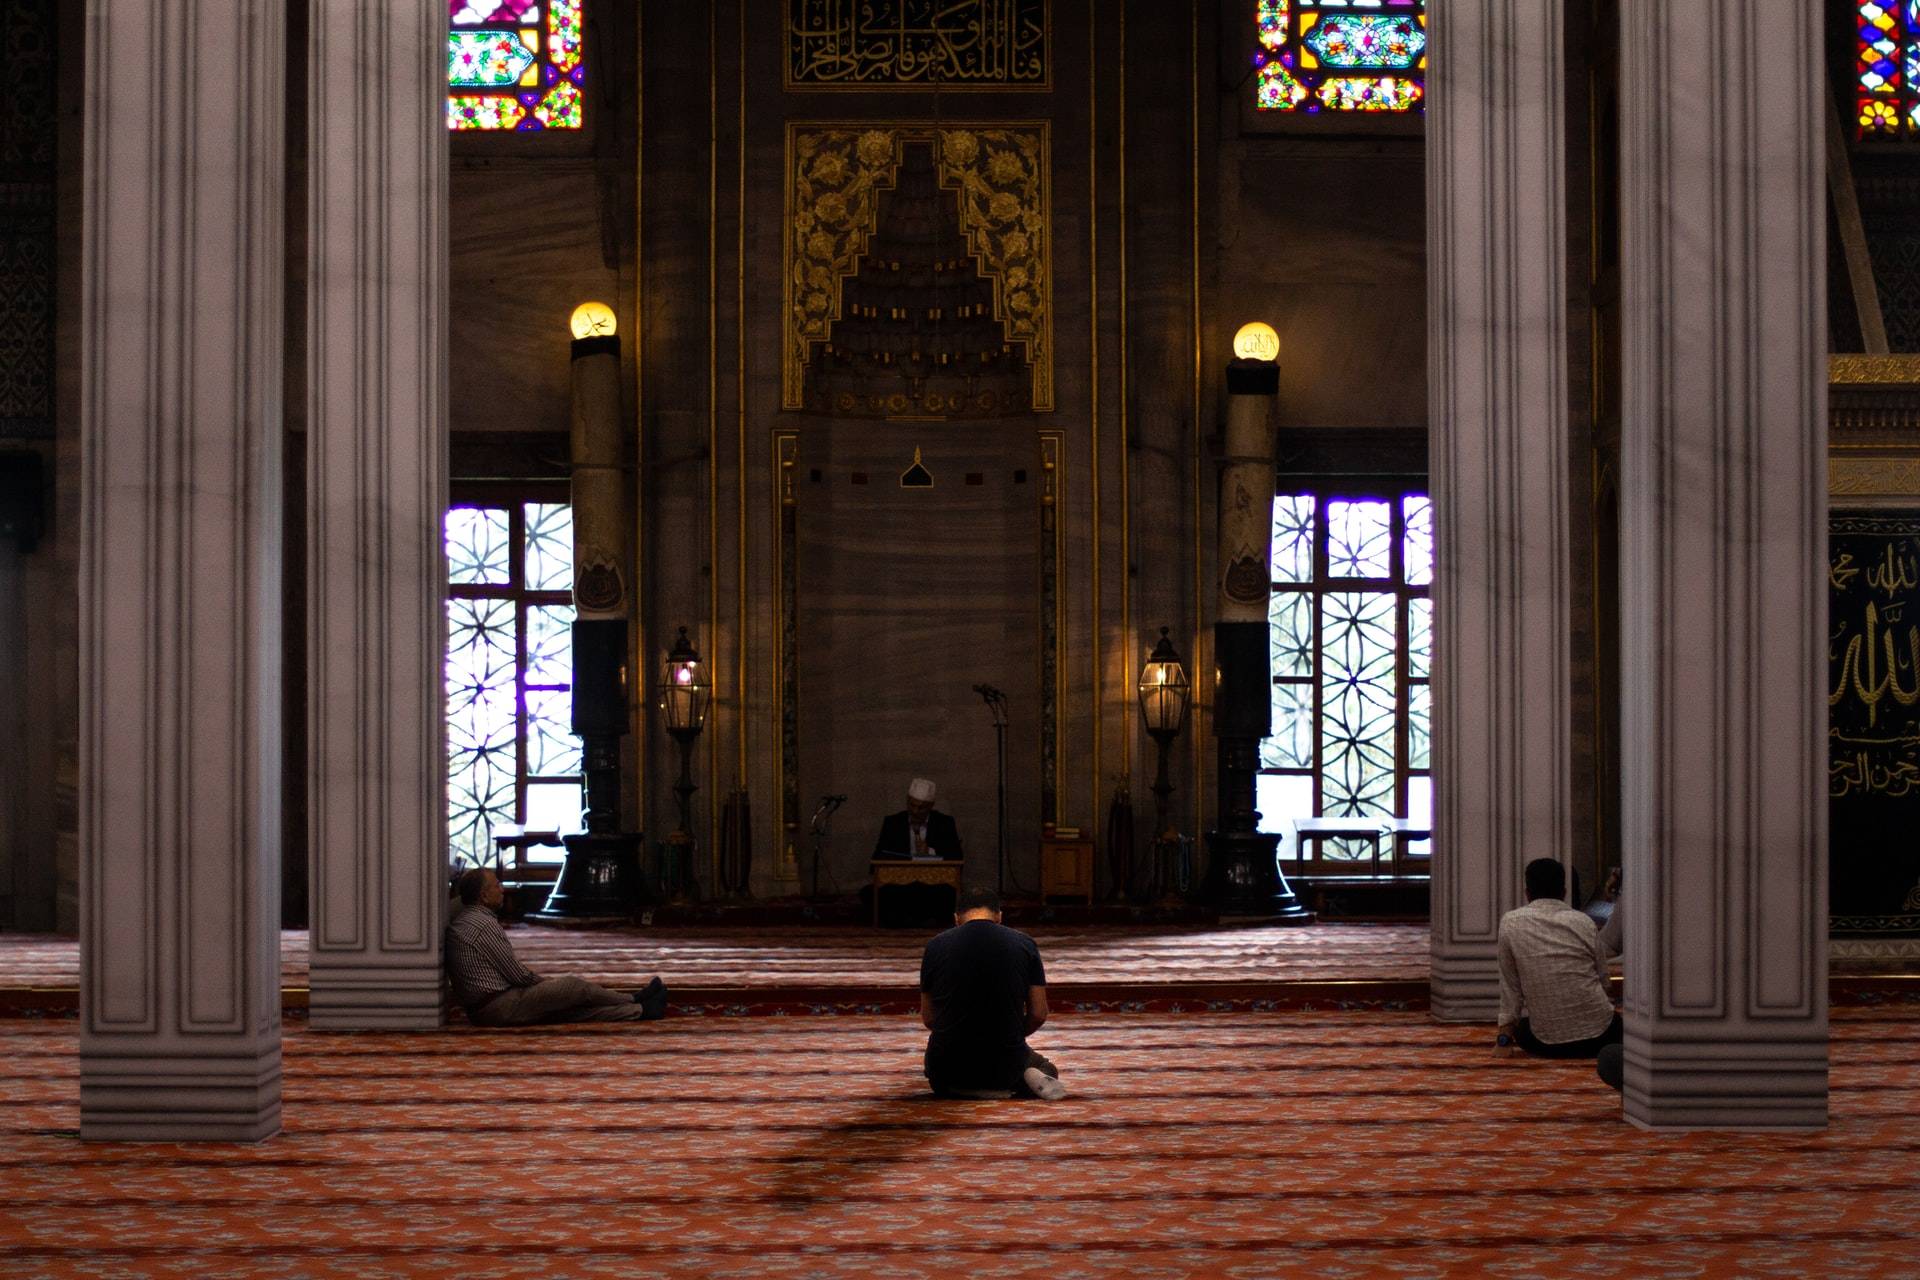 France to Investigate 76 More Mosques After Closing 74 Mosques in France